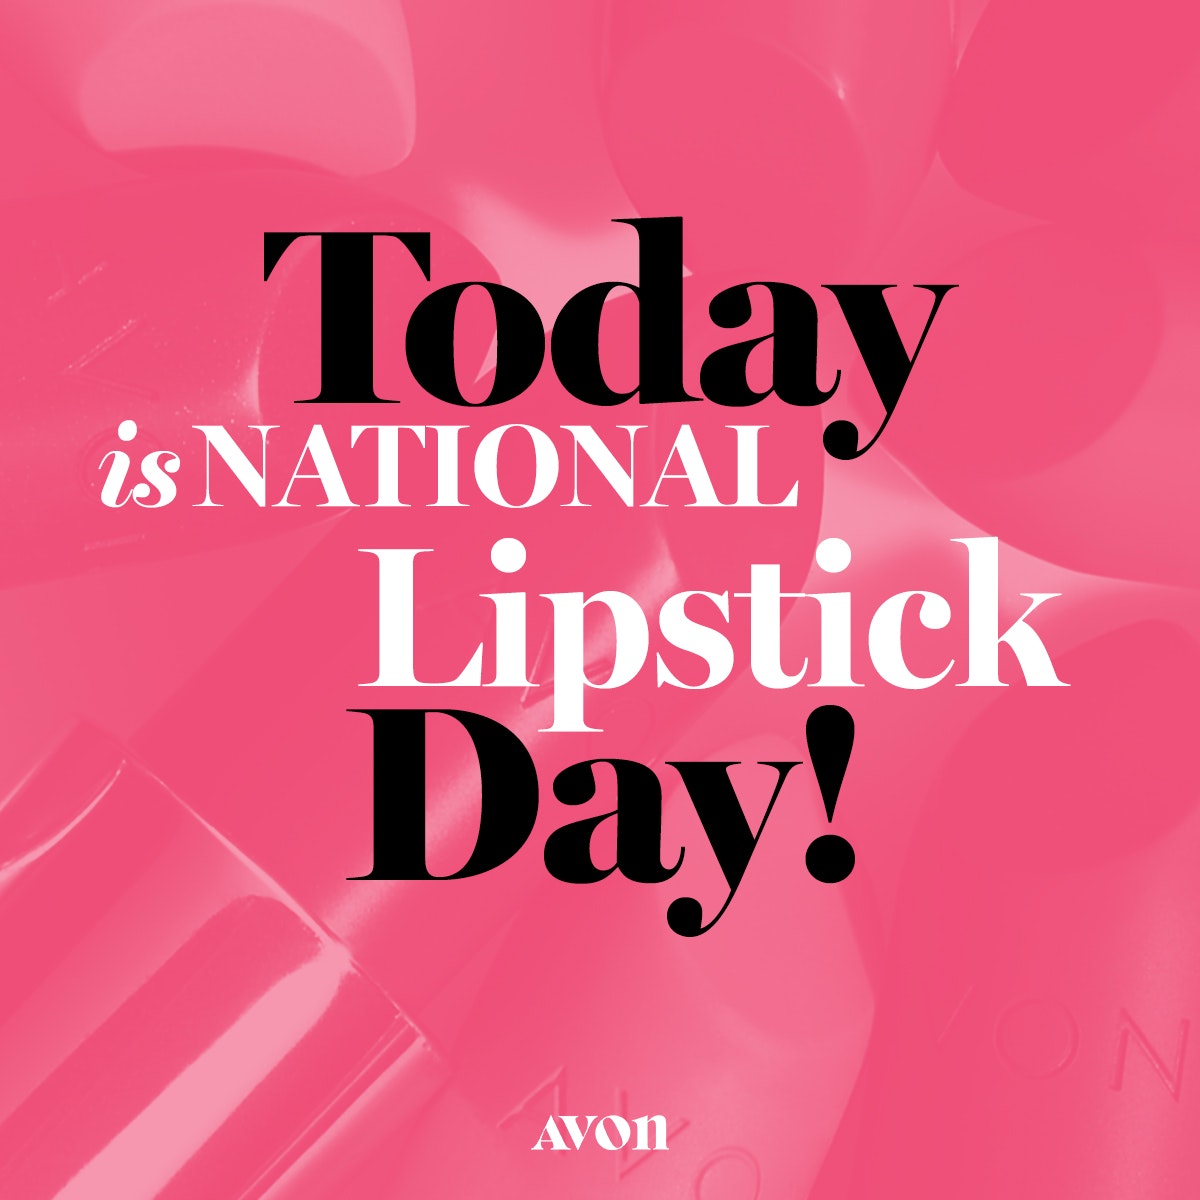 National Lipstick Day is Today! Deanna's Avon Blog